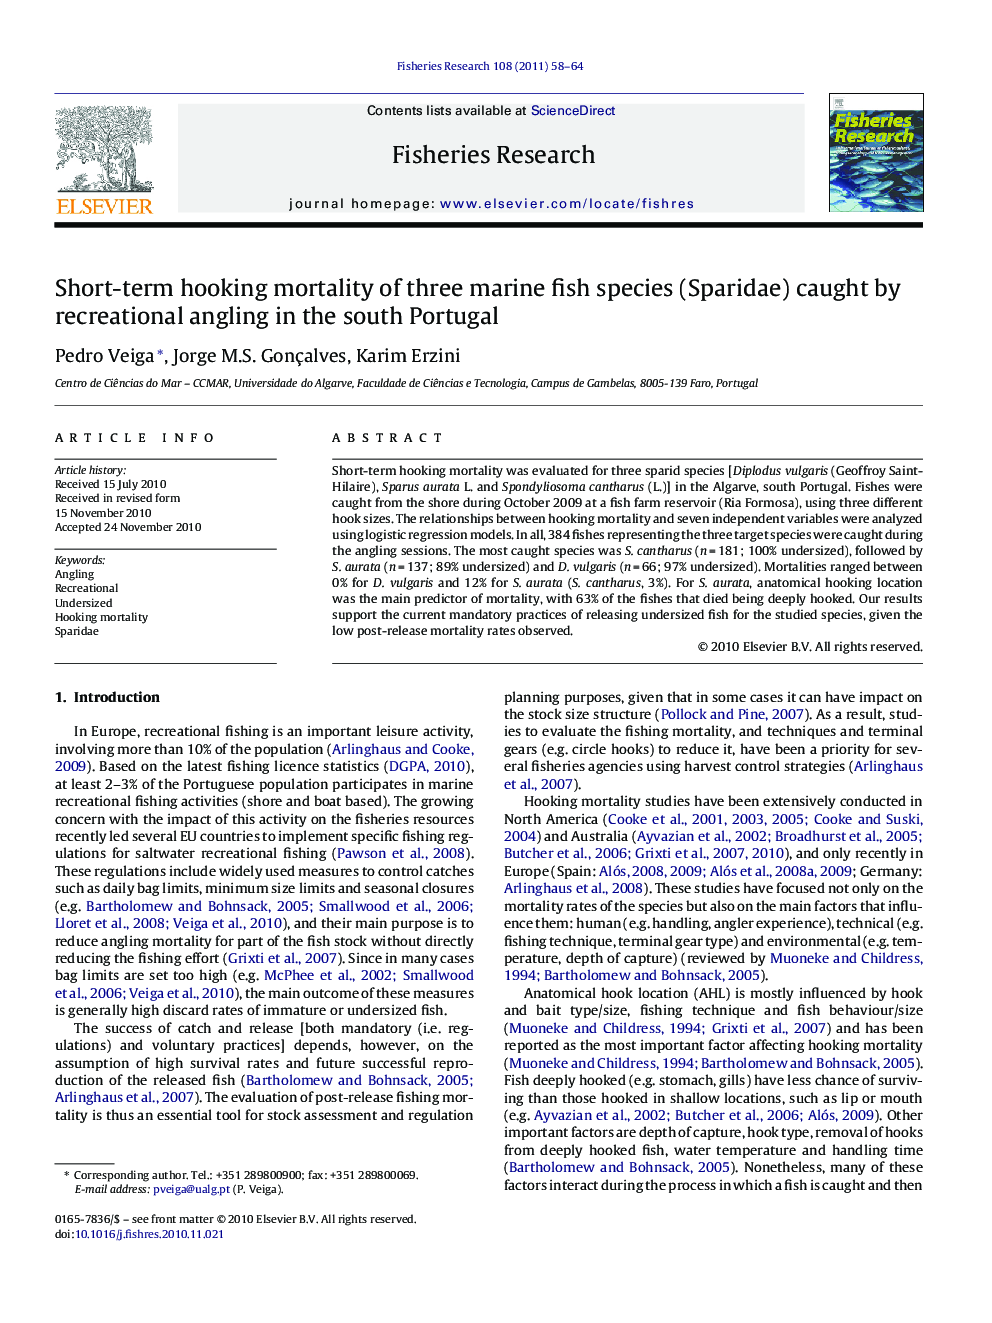 Short-term hooking mortality of three marine fish species (Sparidae) caught by recreational angling in the south Portugal